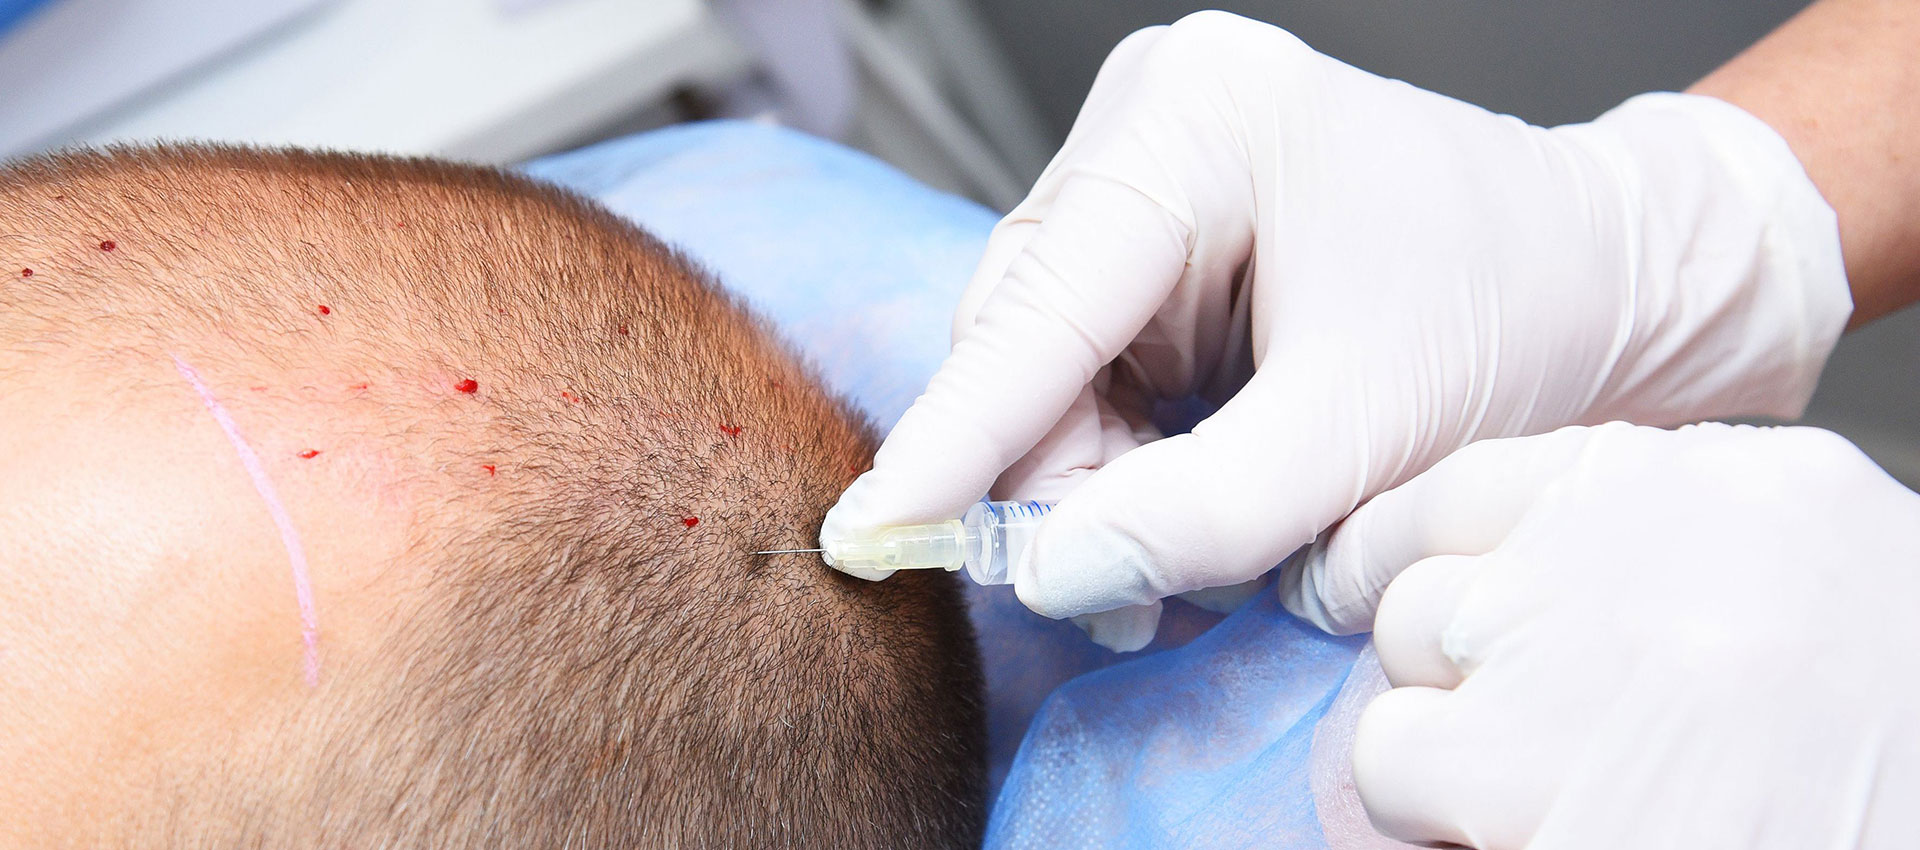 How To Prevent A Hair Transplant Infection